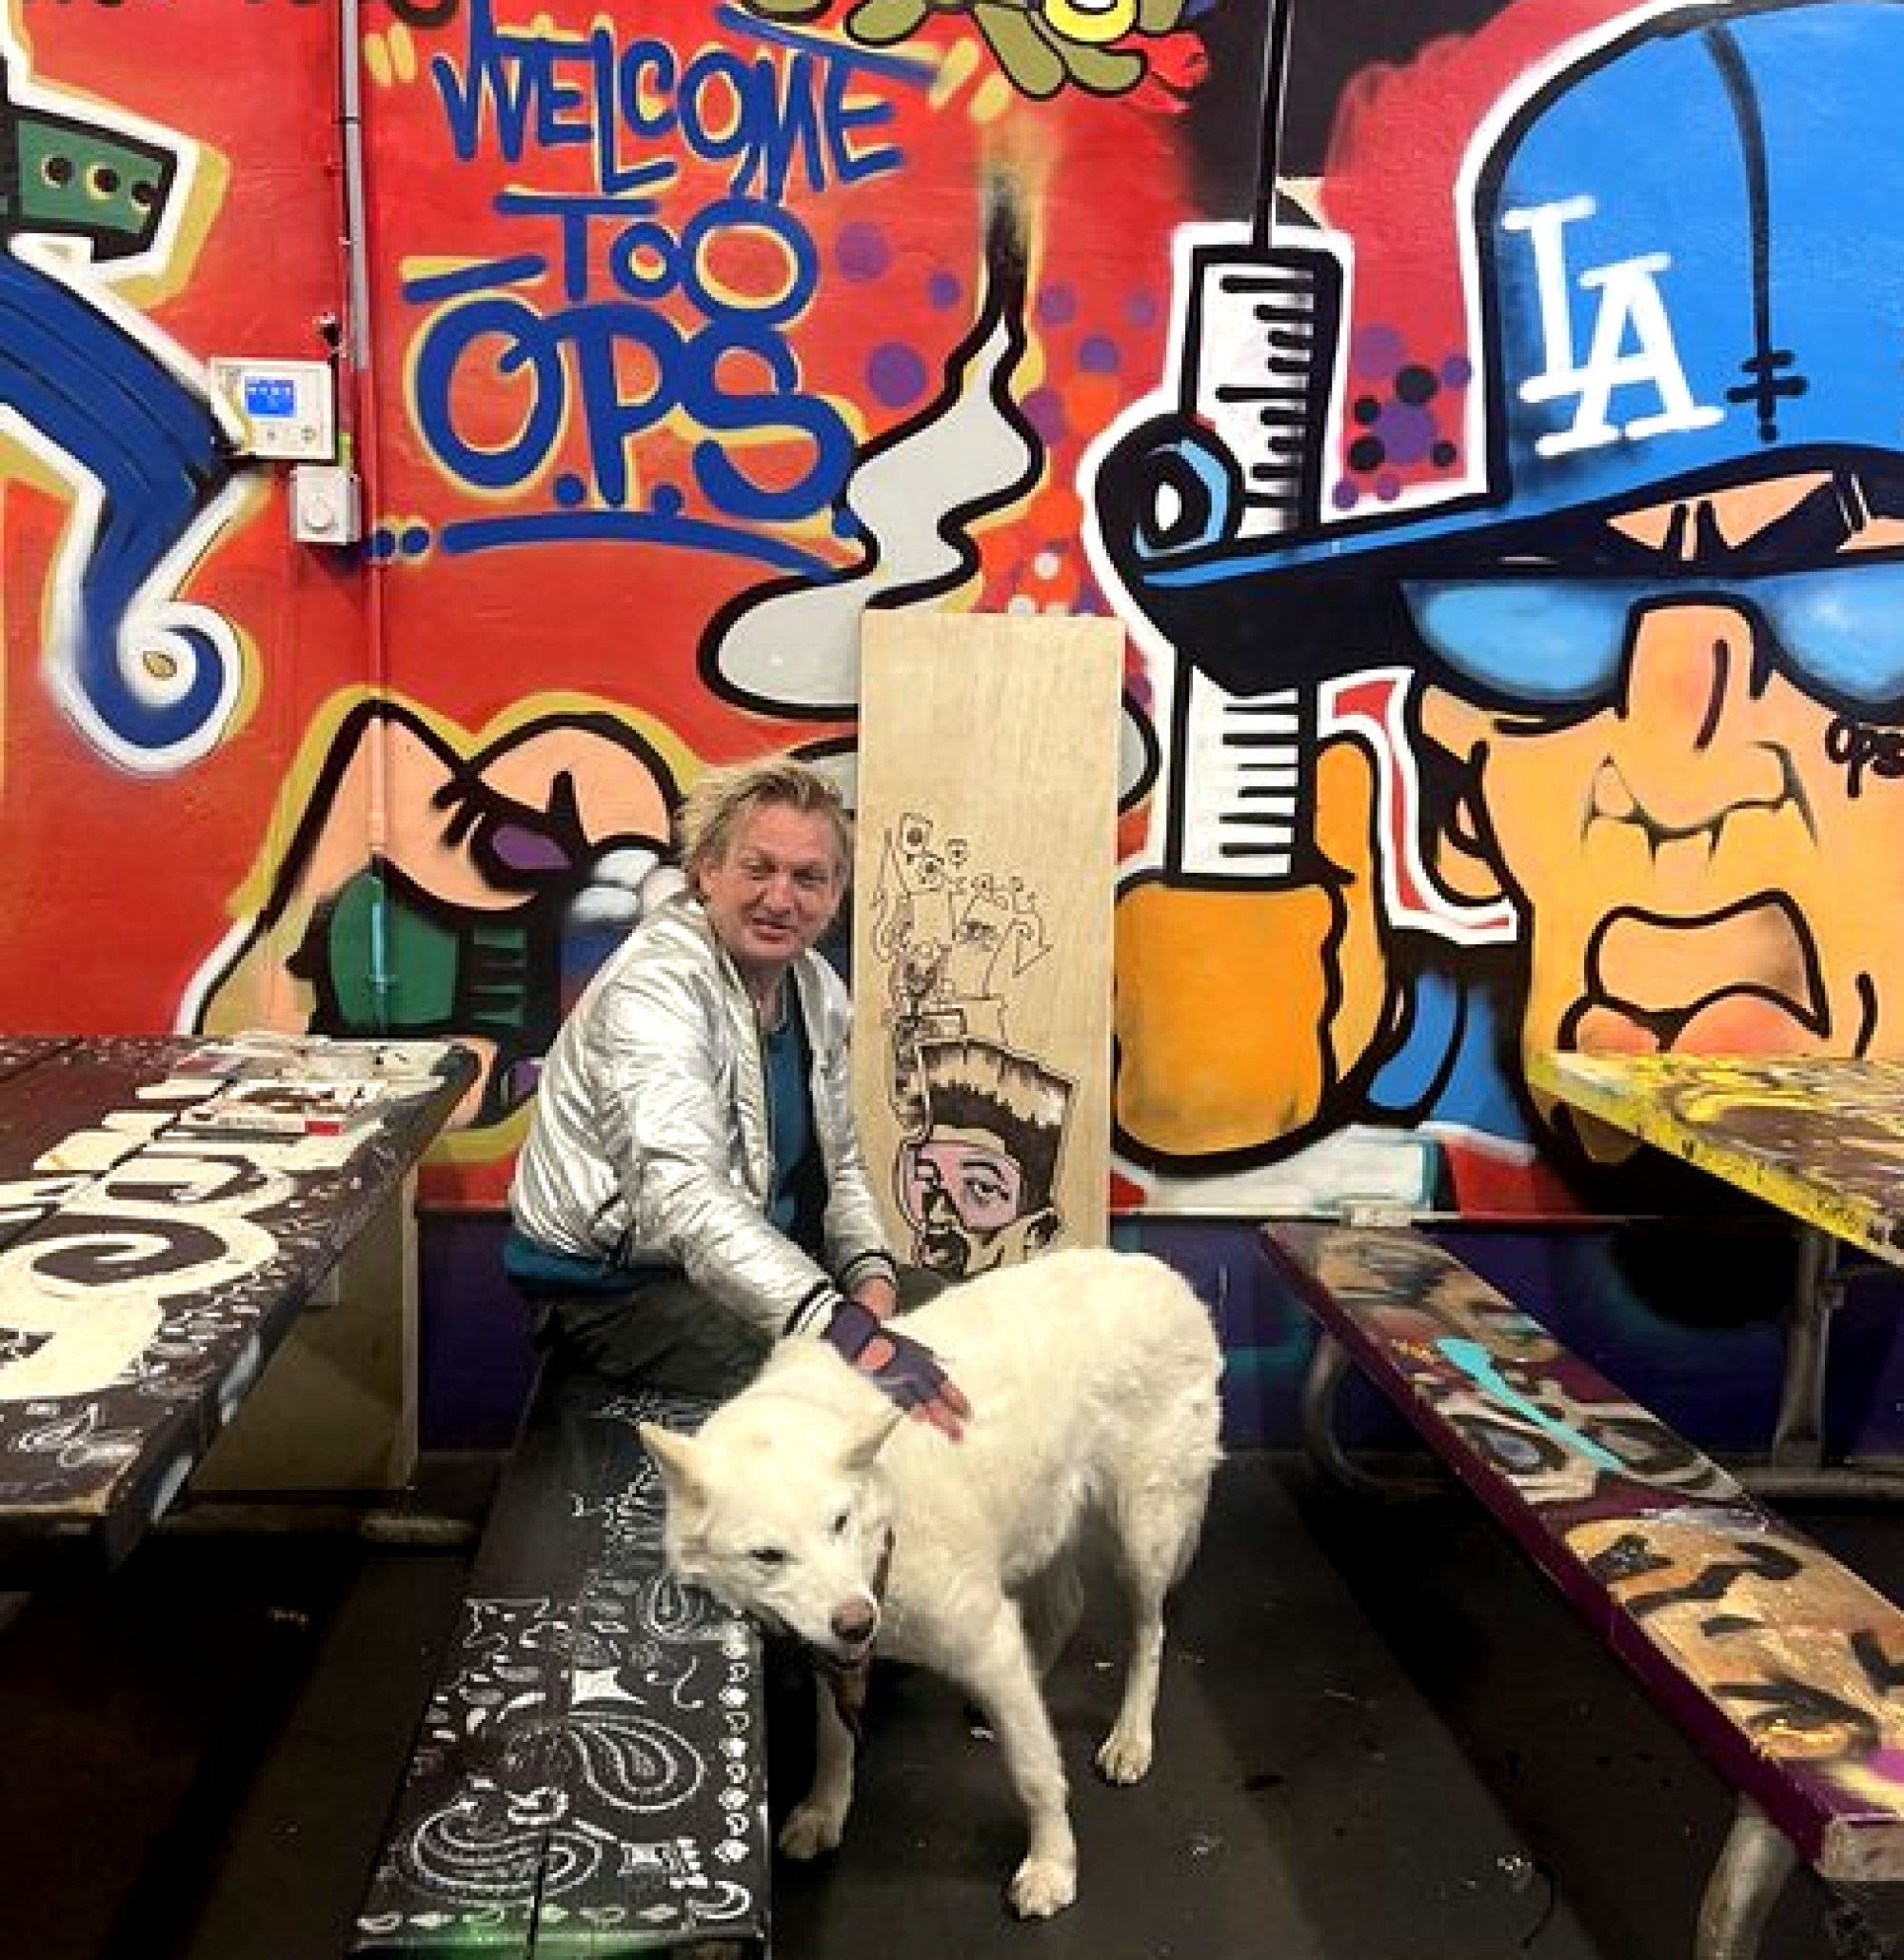 A man with a dog sits at a picnic table in front of a brightly painted mural